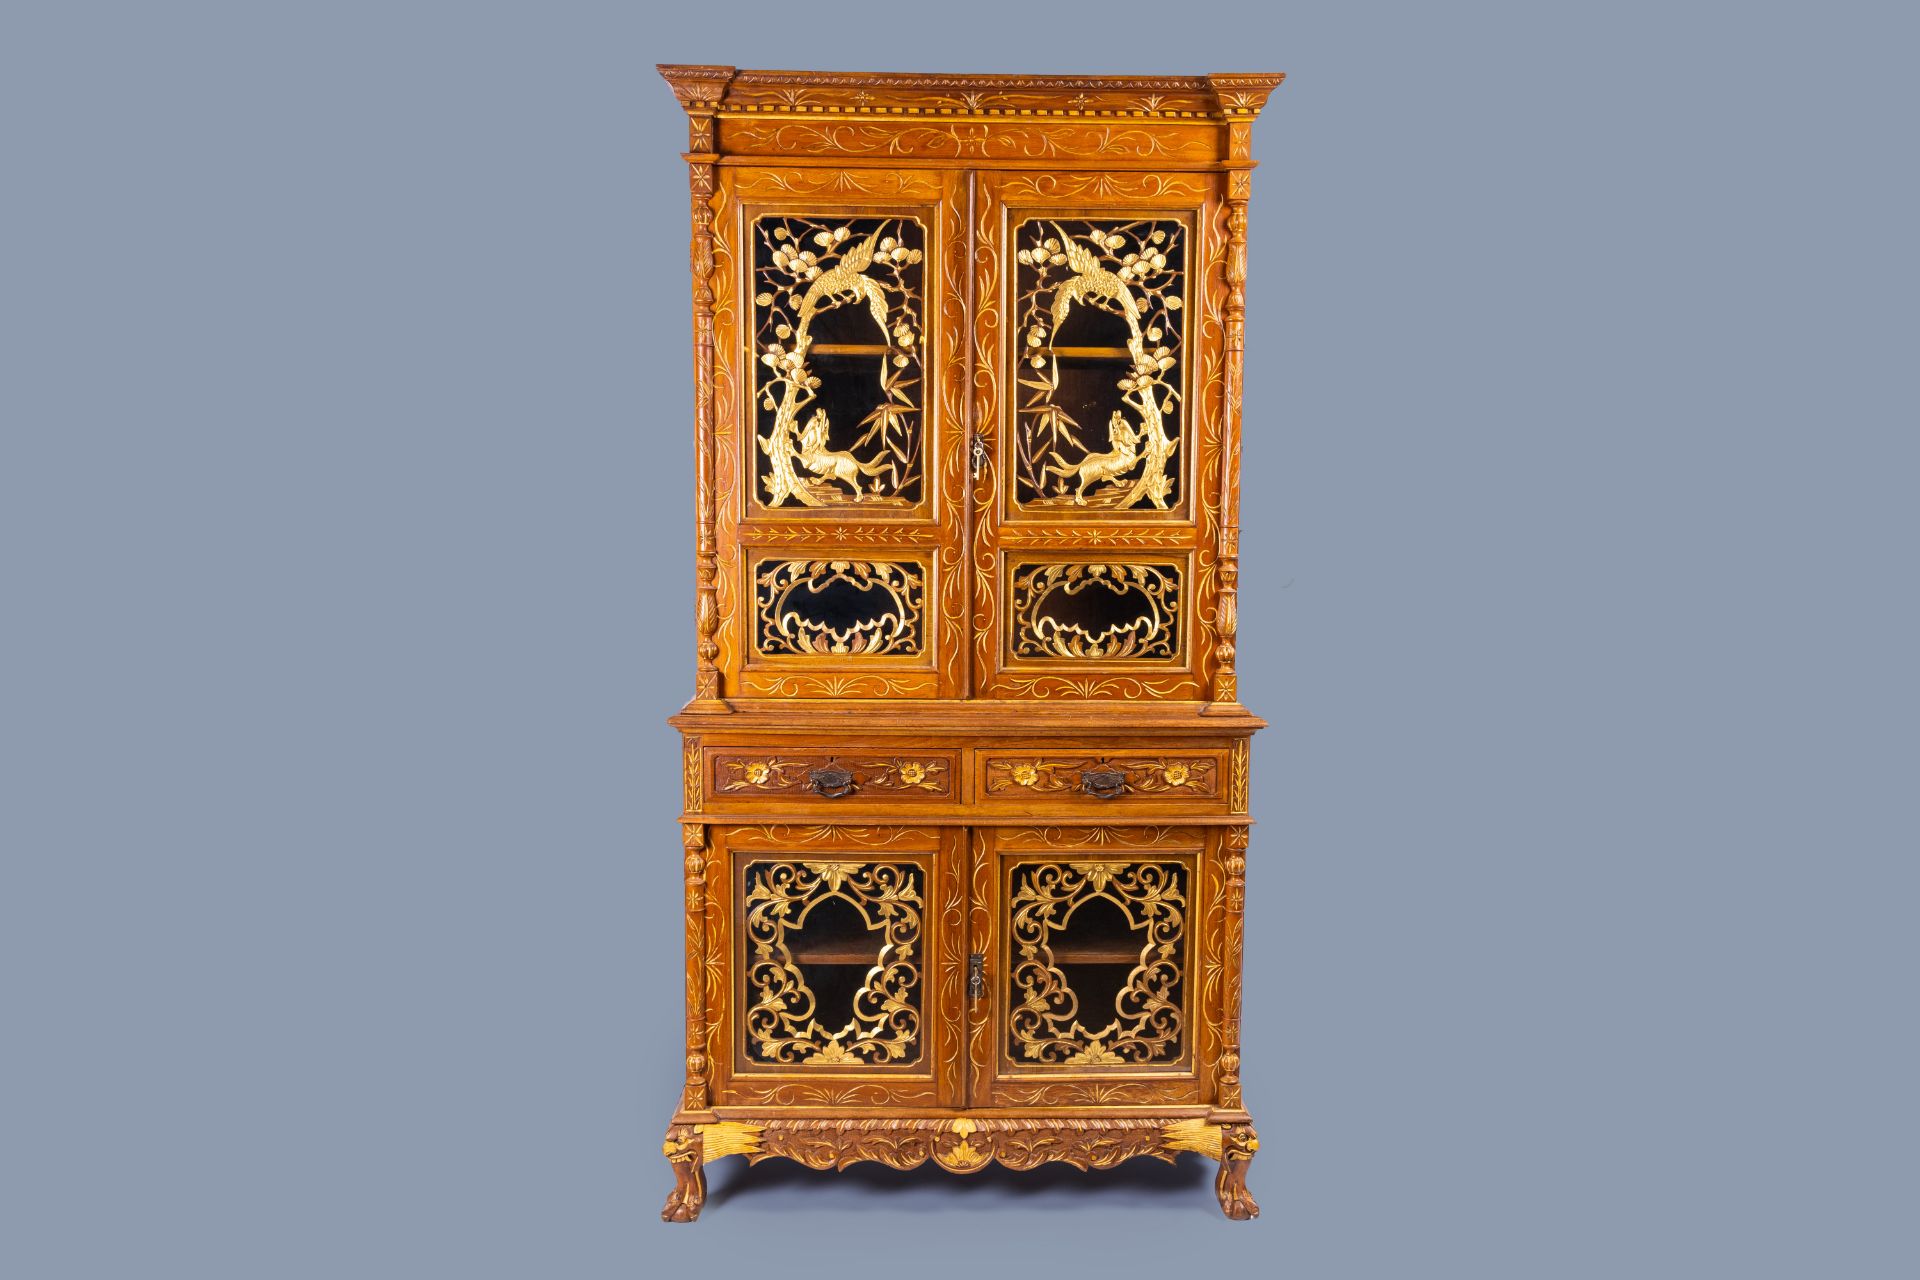 A Chinese Straits or Peranakan market gilt wood four-door cabinet, 19th C. - Image 2 of 8